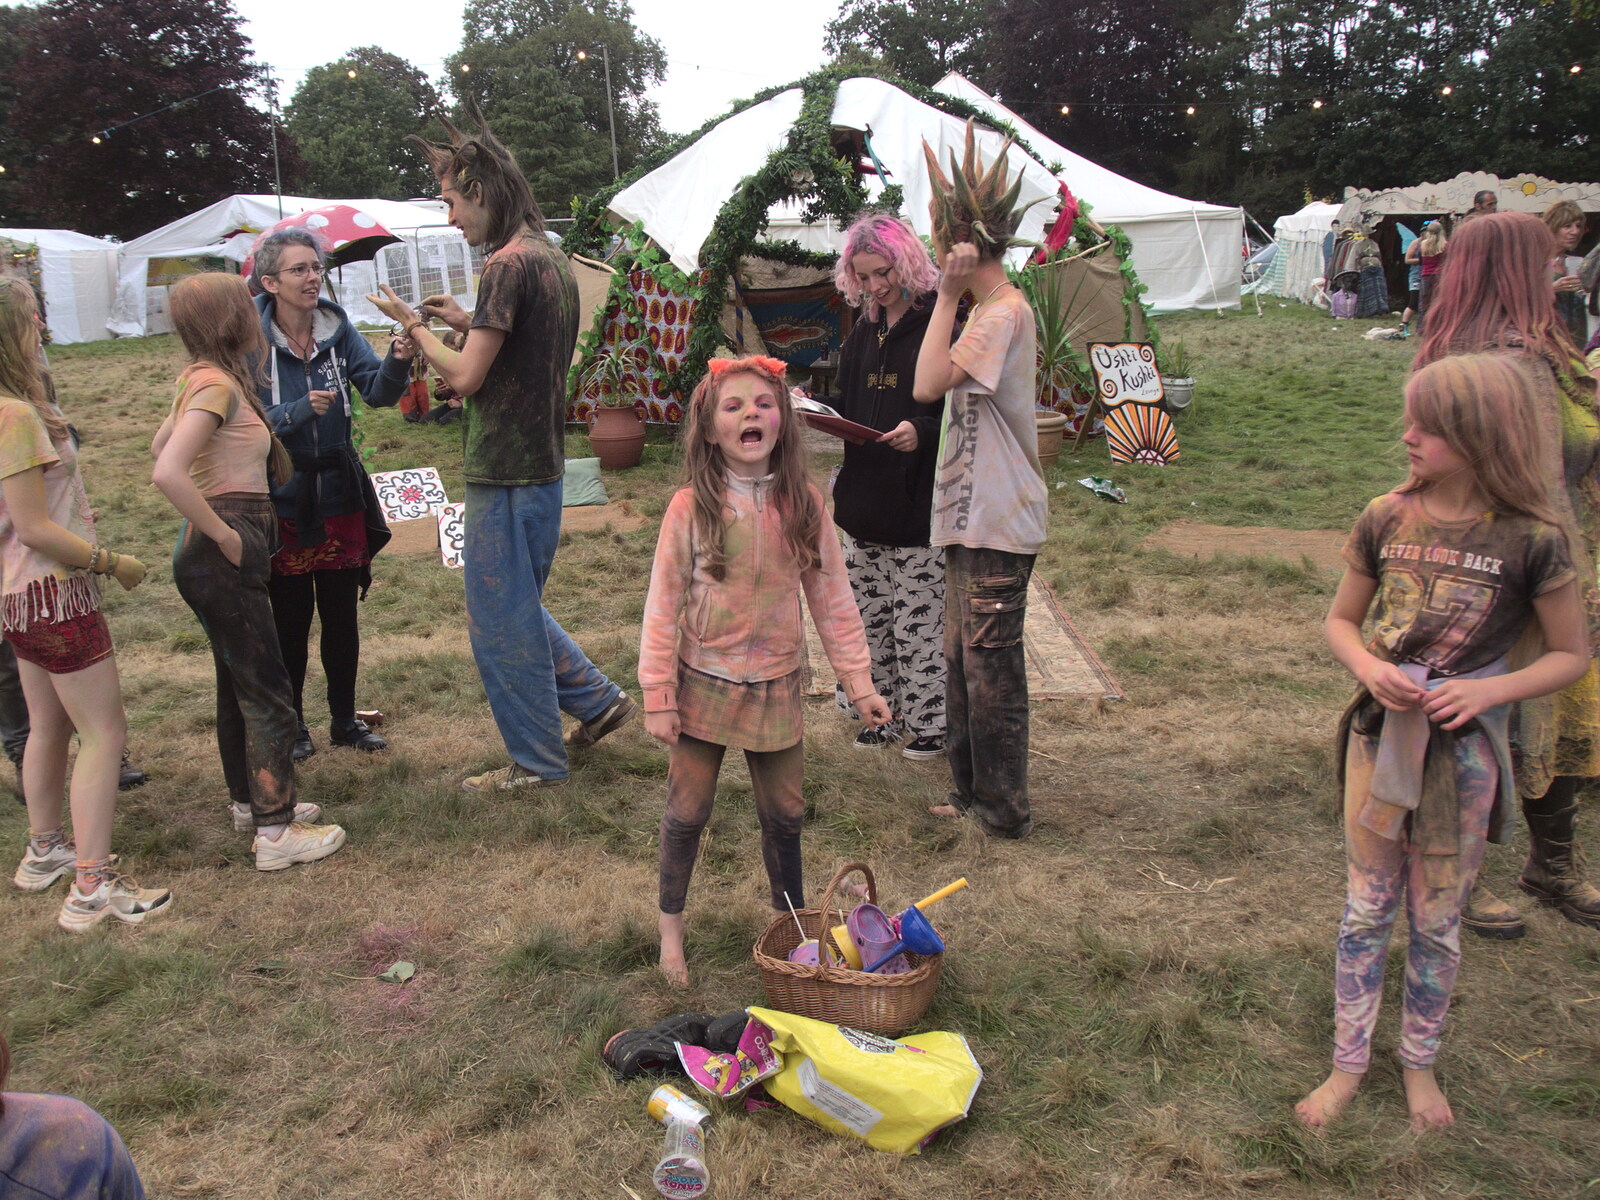 A girl shouts as some spiky punks walk past from Maui Waui Festival, Hill Farm, Gressenhall, Norfolk - 28th August 2021